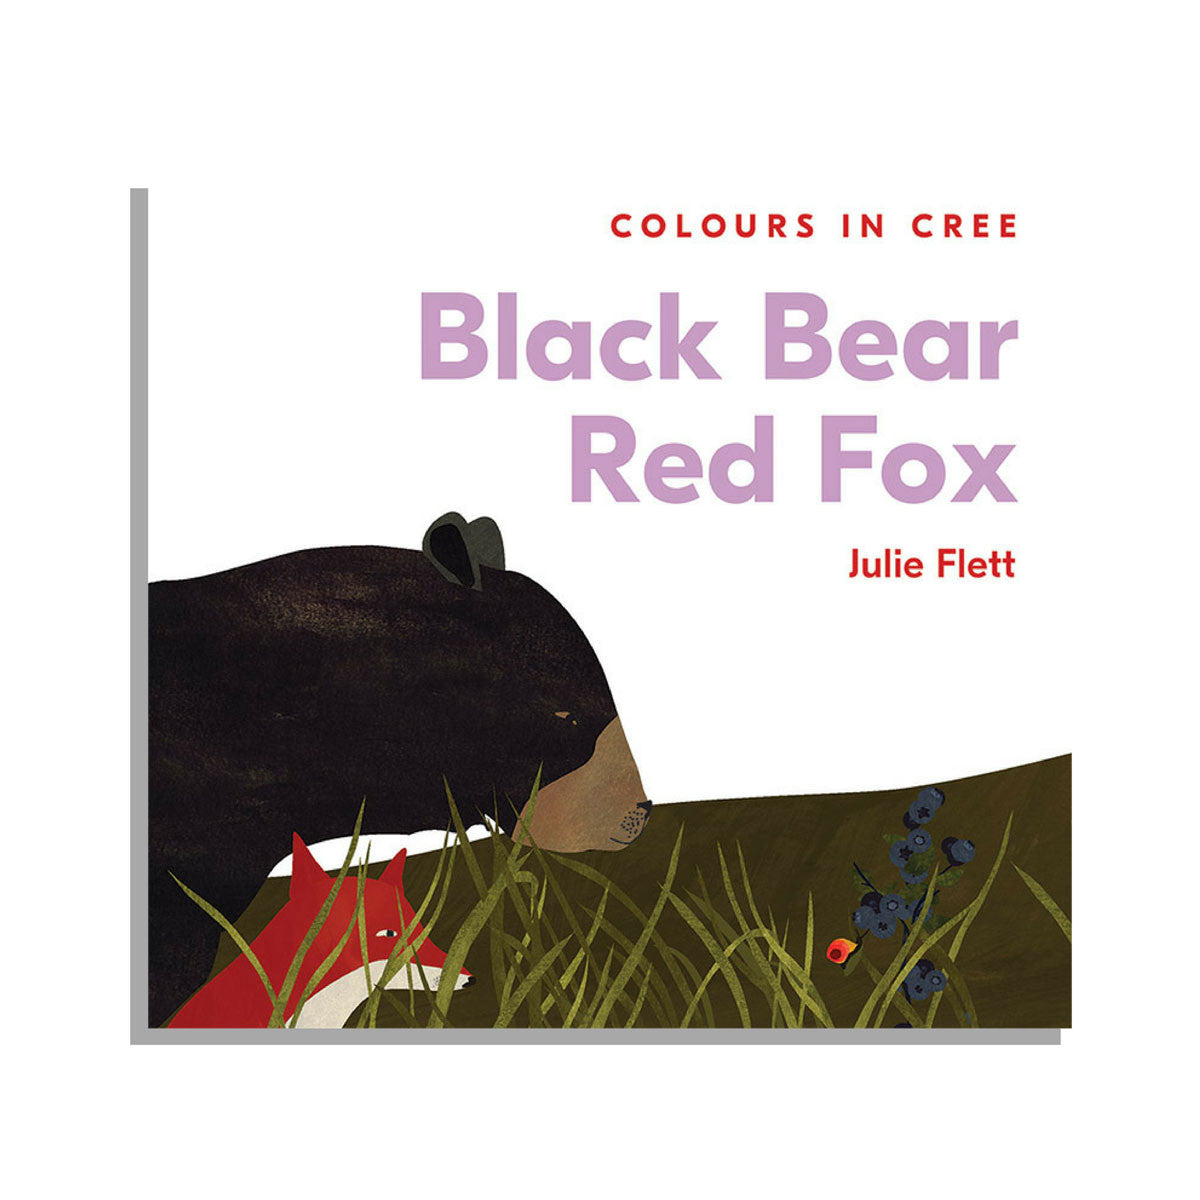 Black Bear Red Fox: Colours in Cree